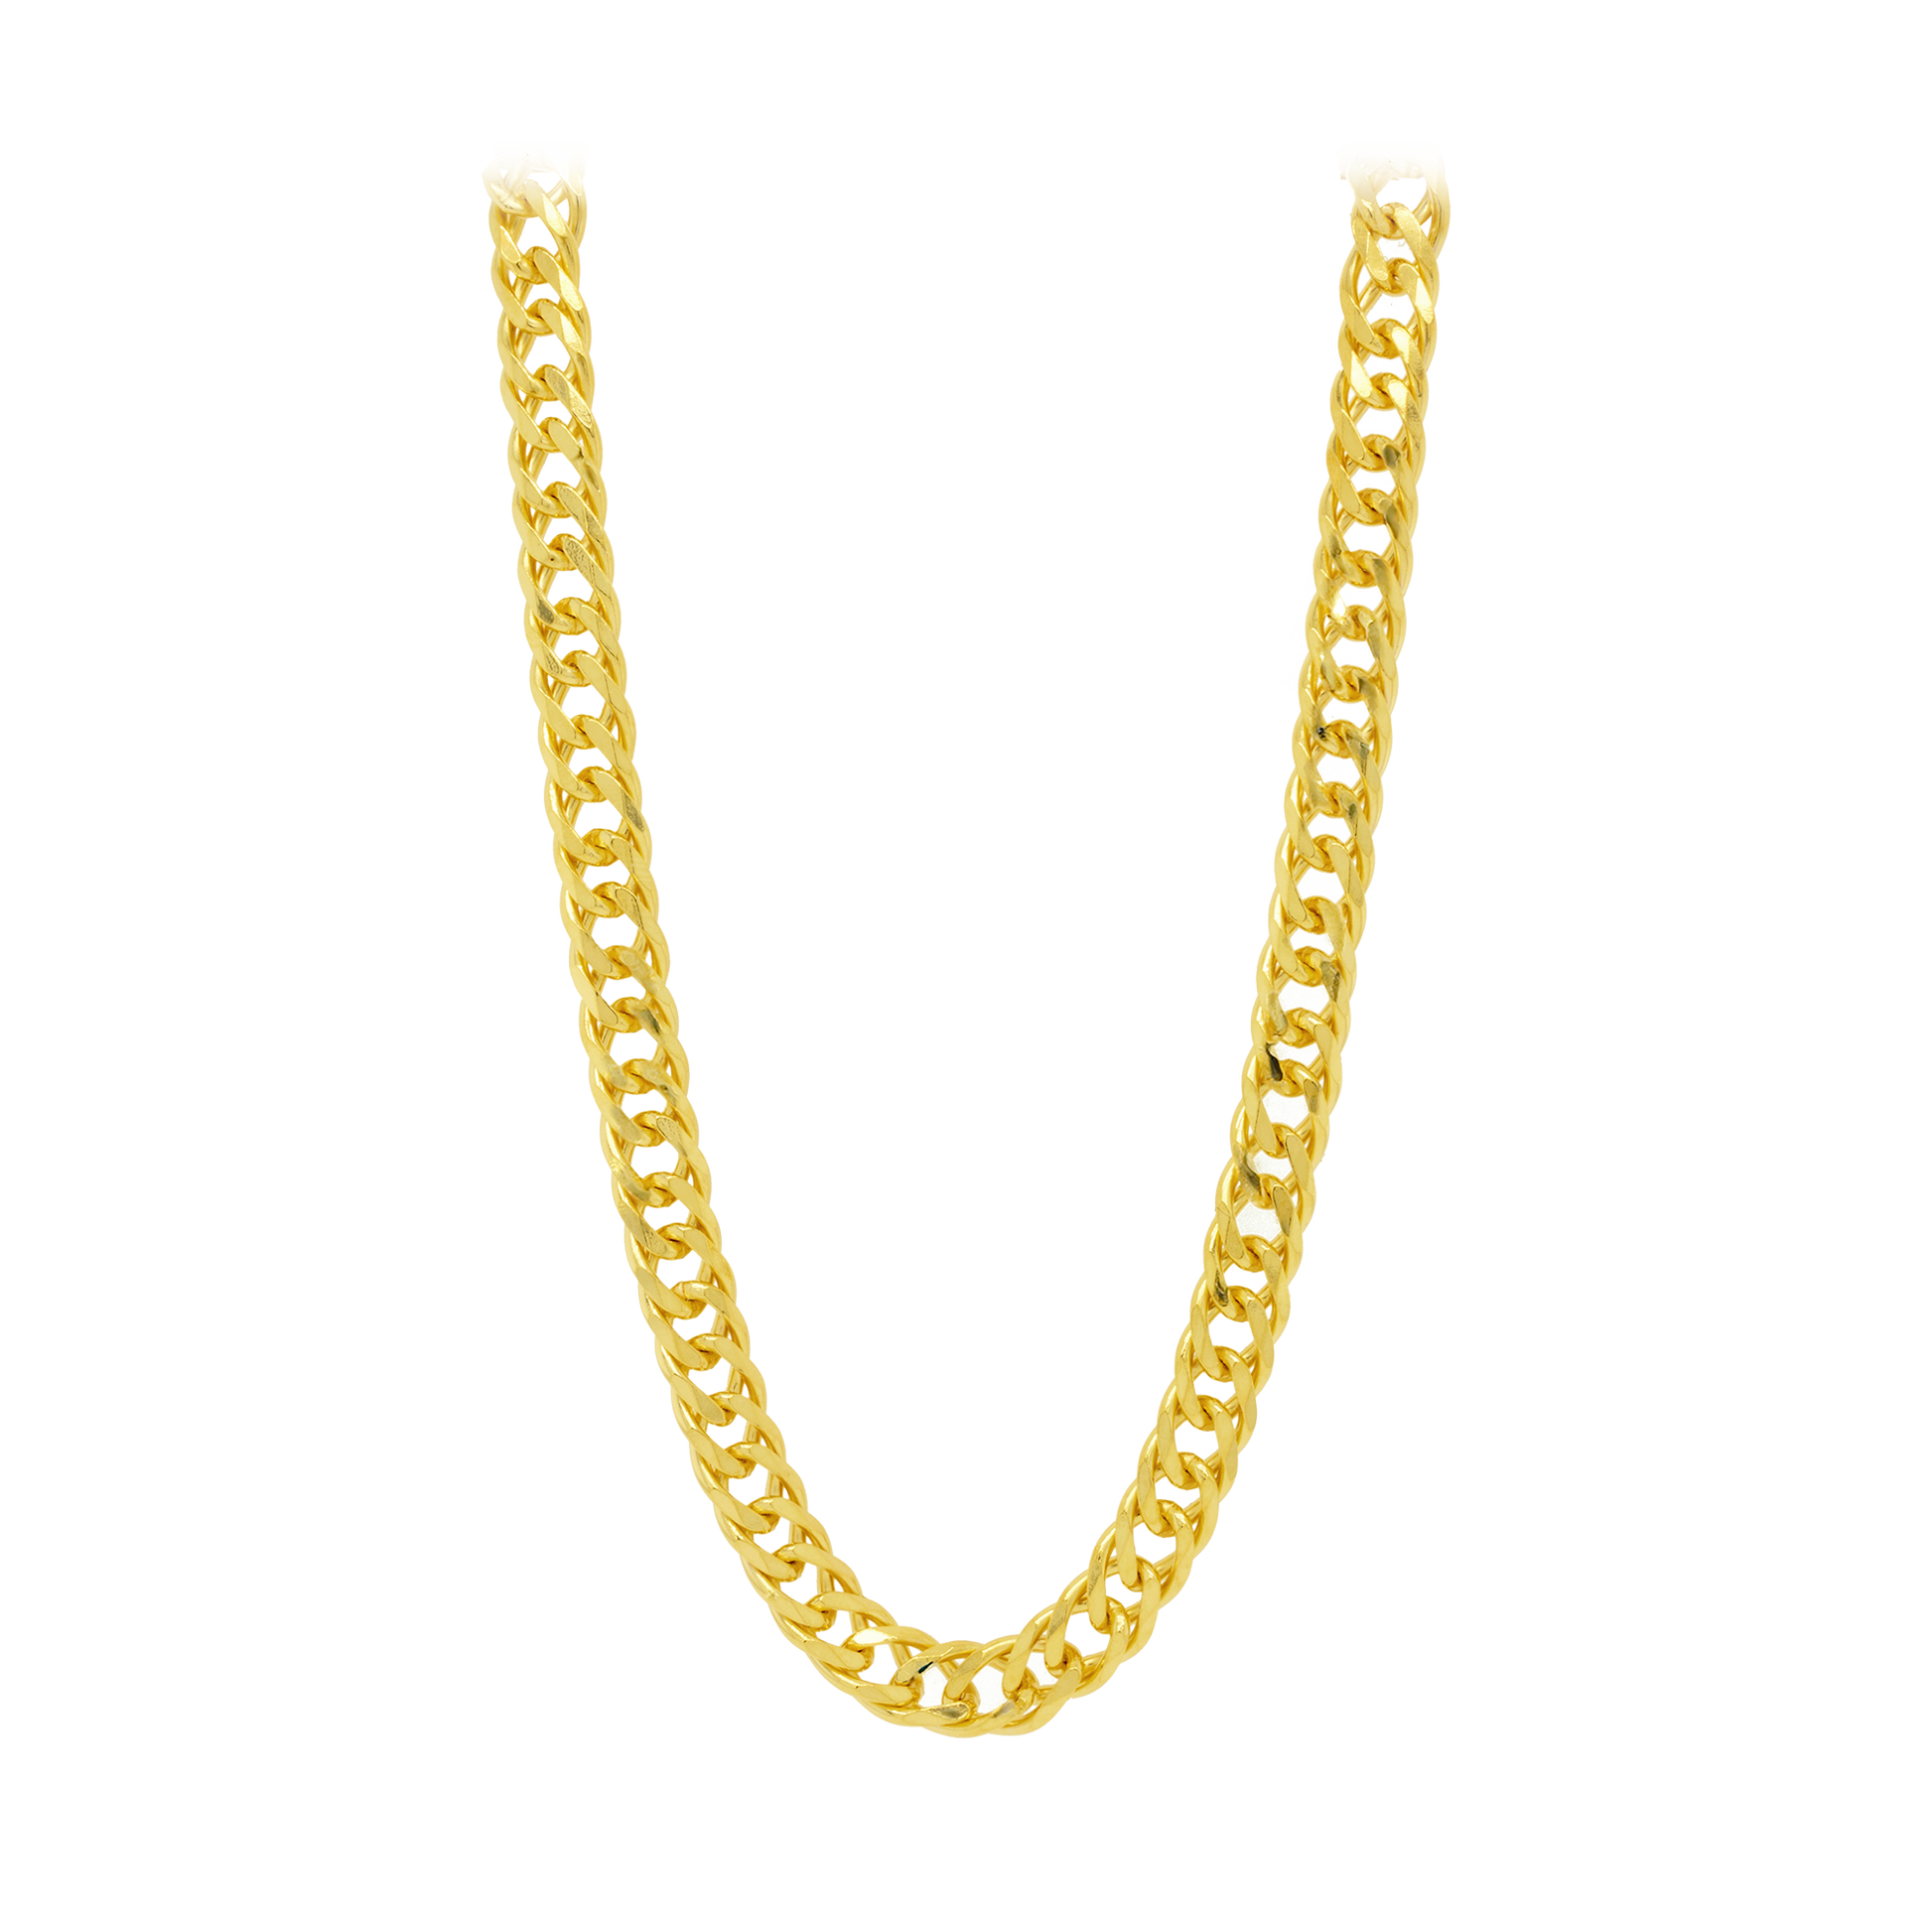 Franco Stellari Italian Sterling Silver Yellow Gold 7mm Double Link Necklace